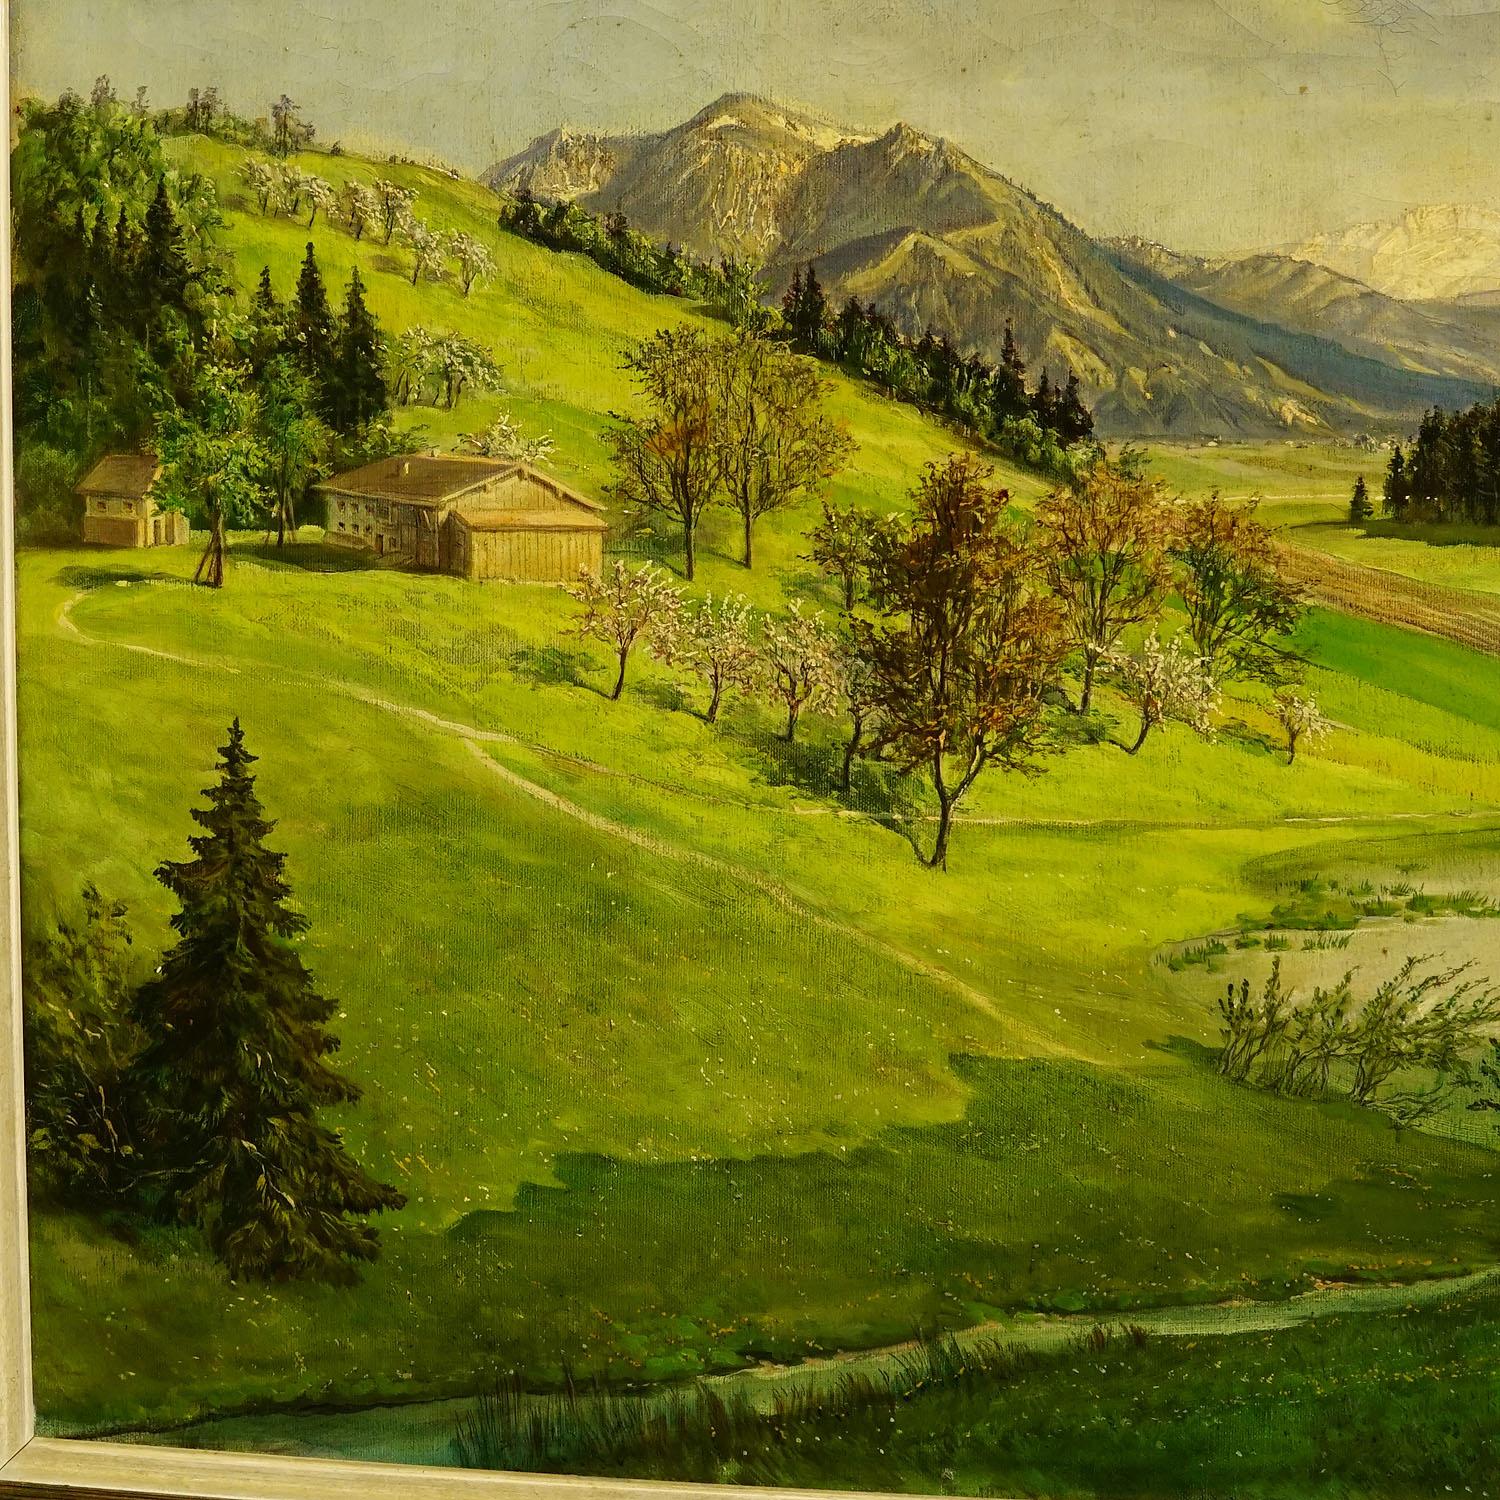 Painted High Mountain Grass Landscape with Alpine Lake in Bavaria, circa 1930s